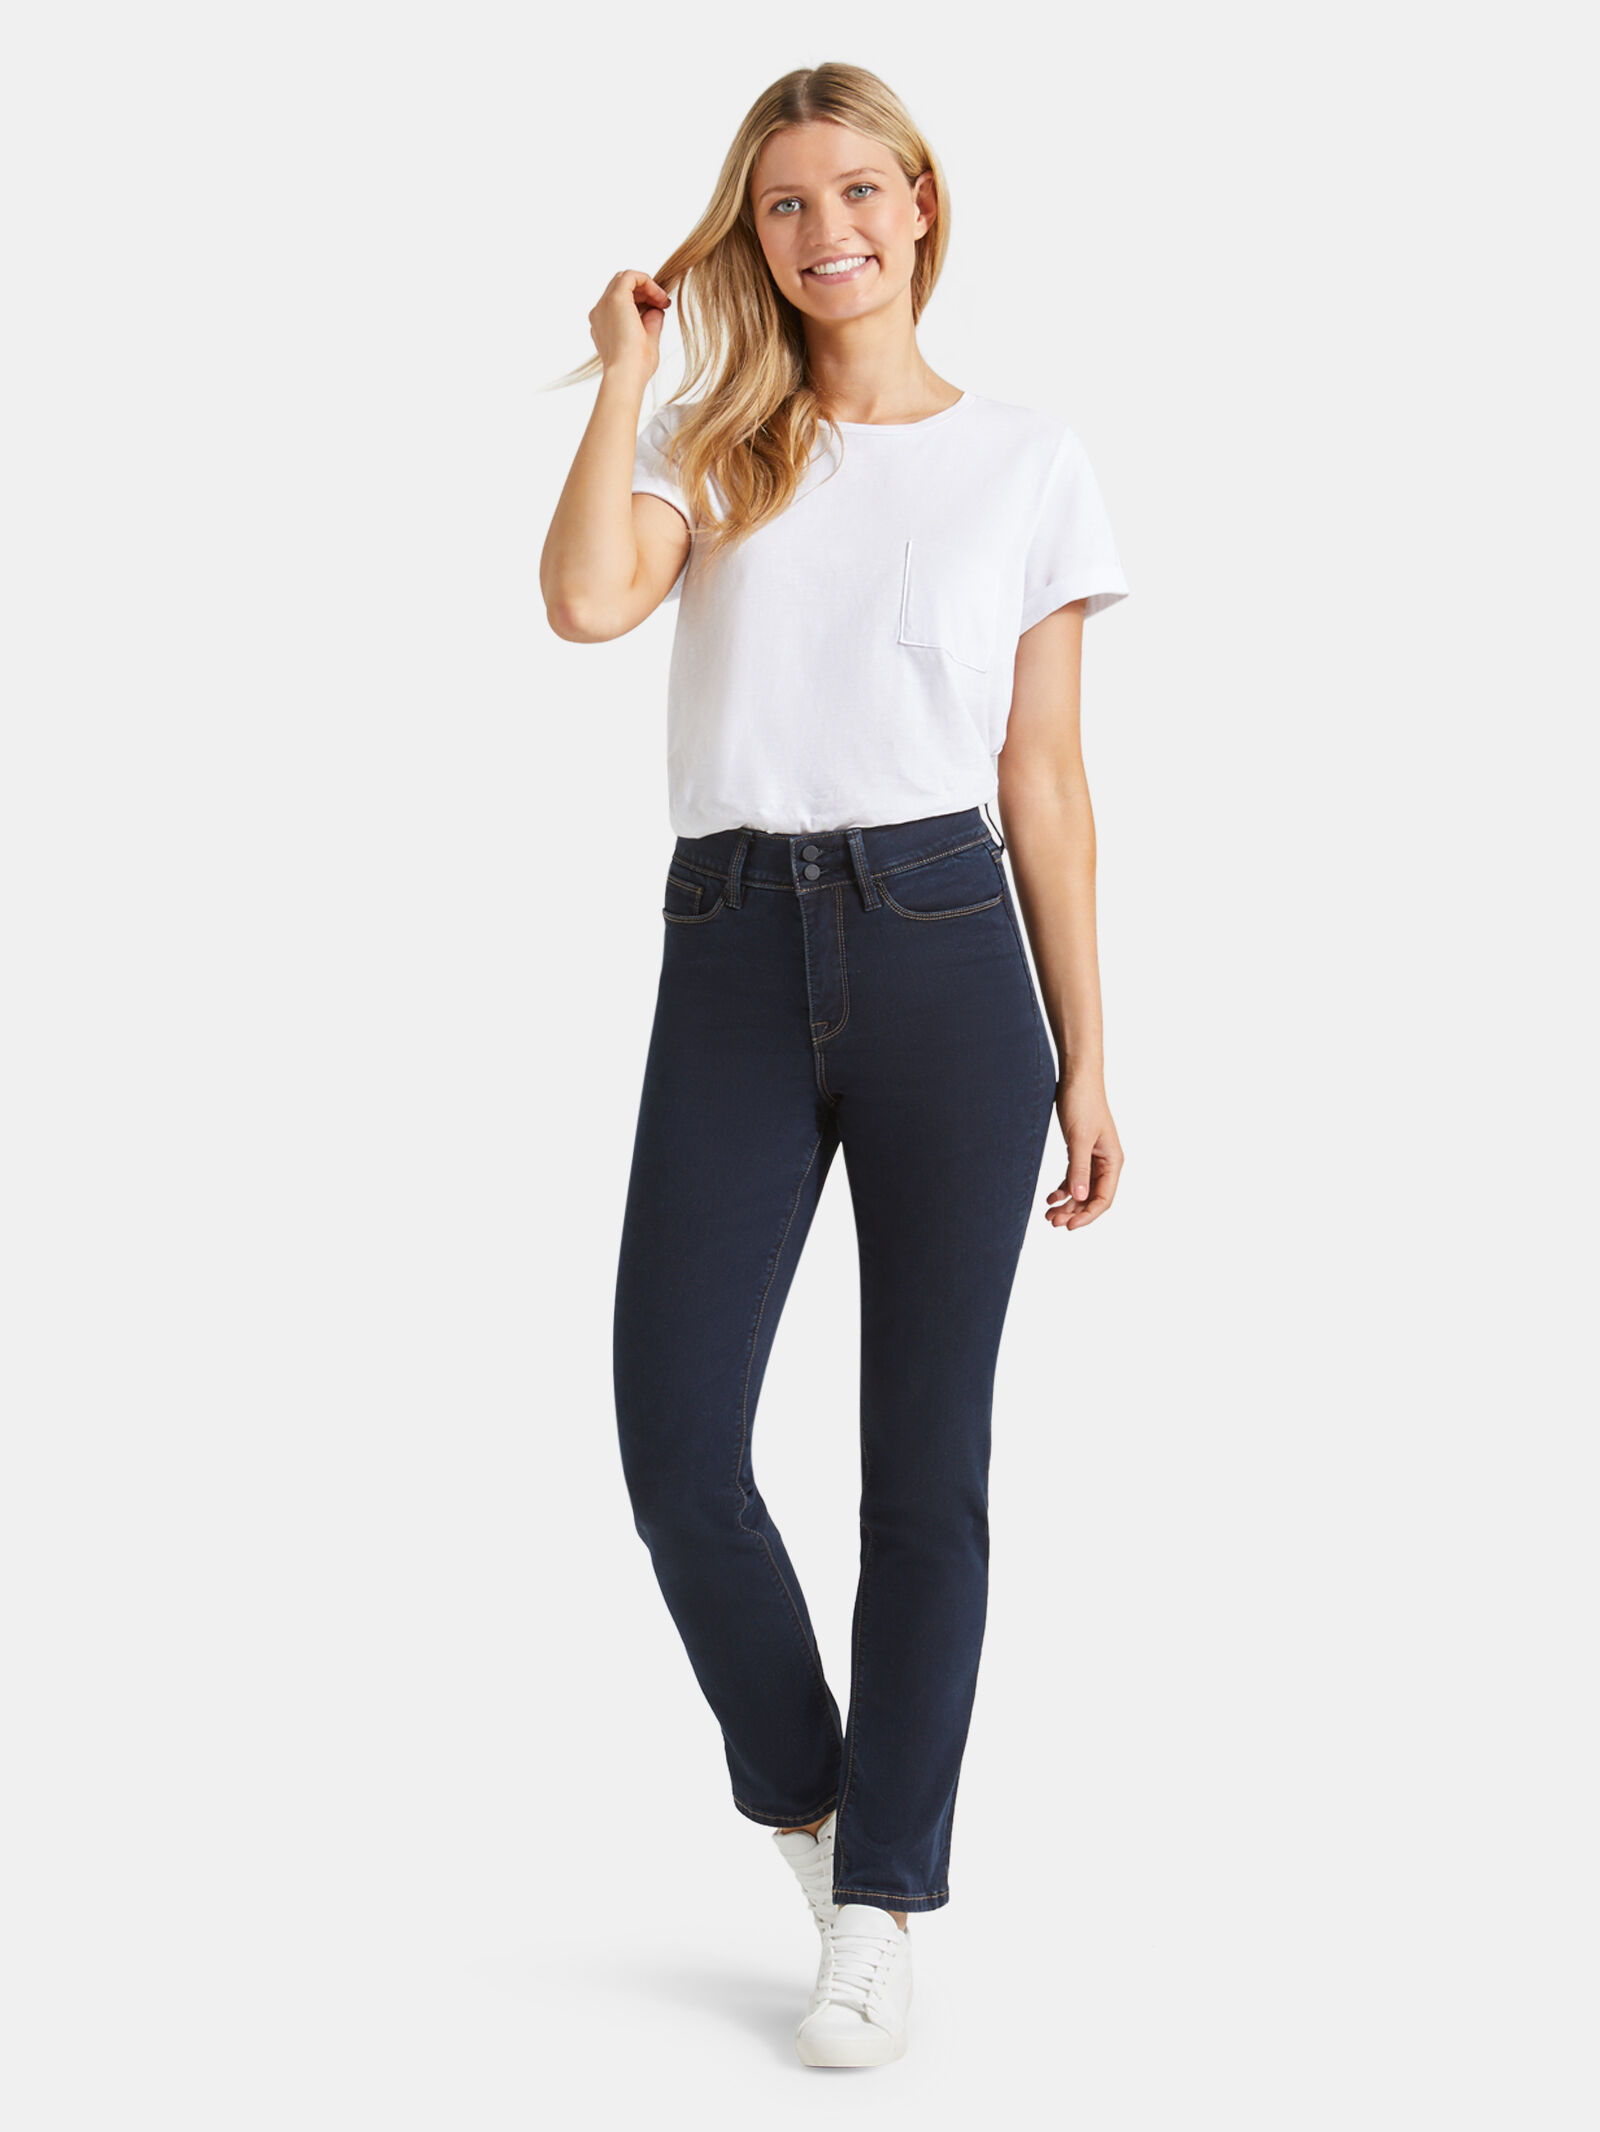 NWT Madewell Slim Straight Jeans in William Wash Tall 26  $128 #G7205 